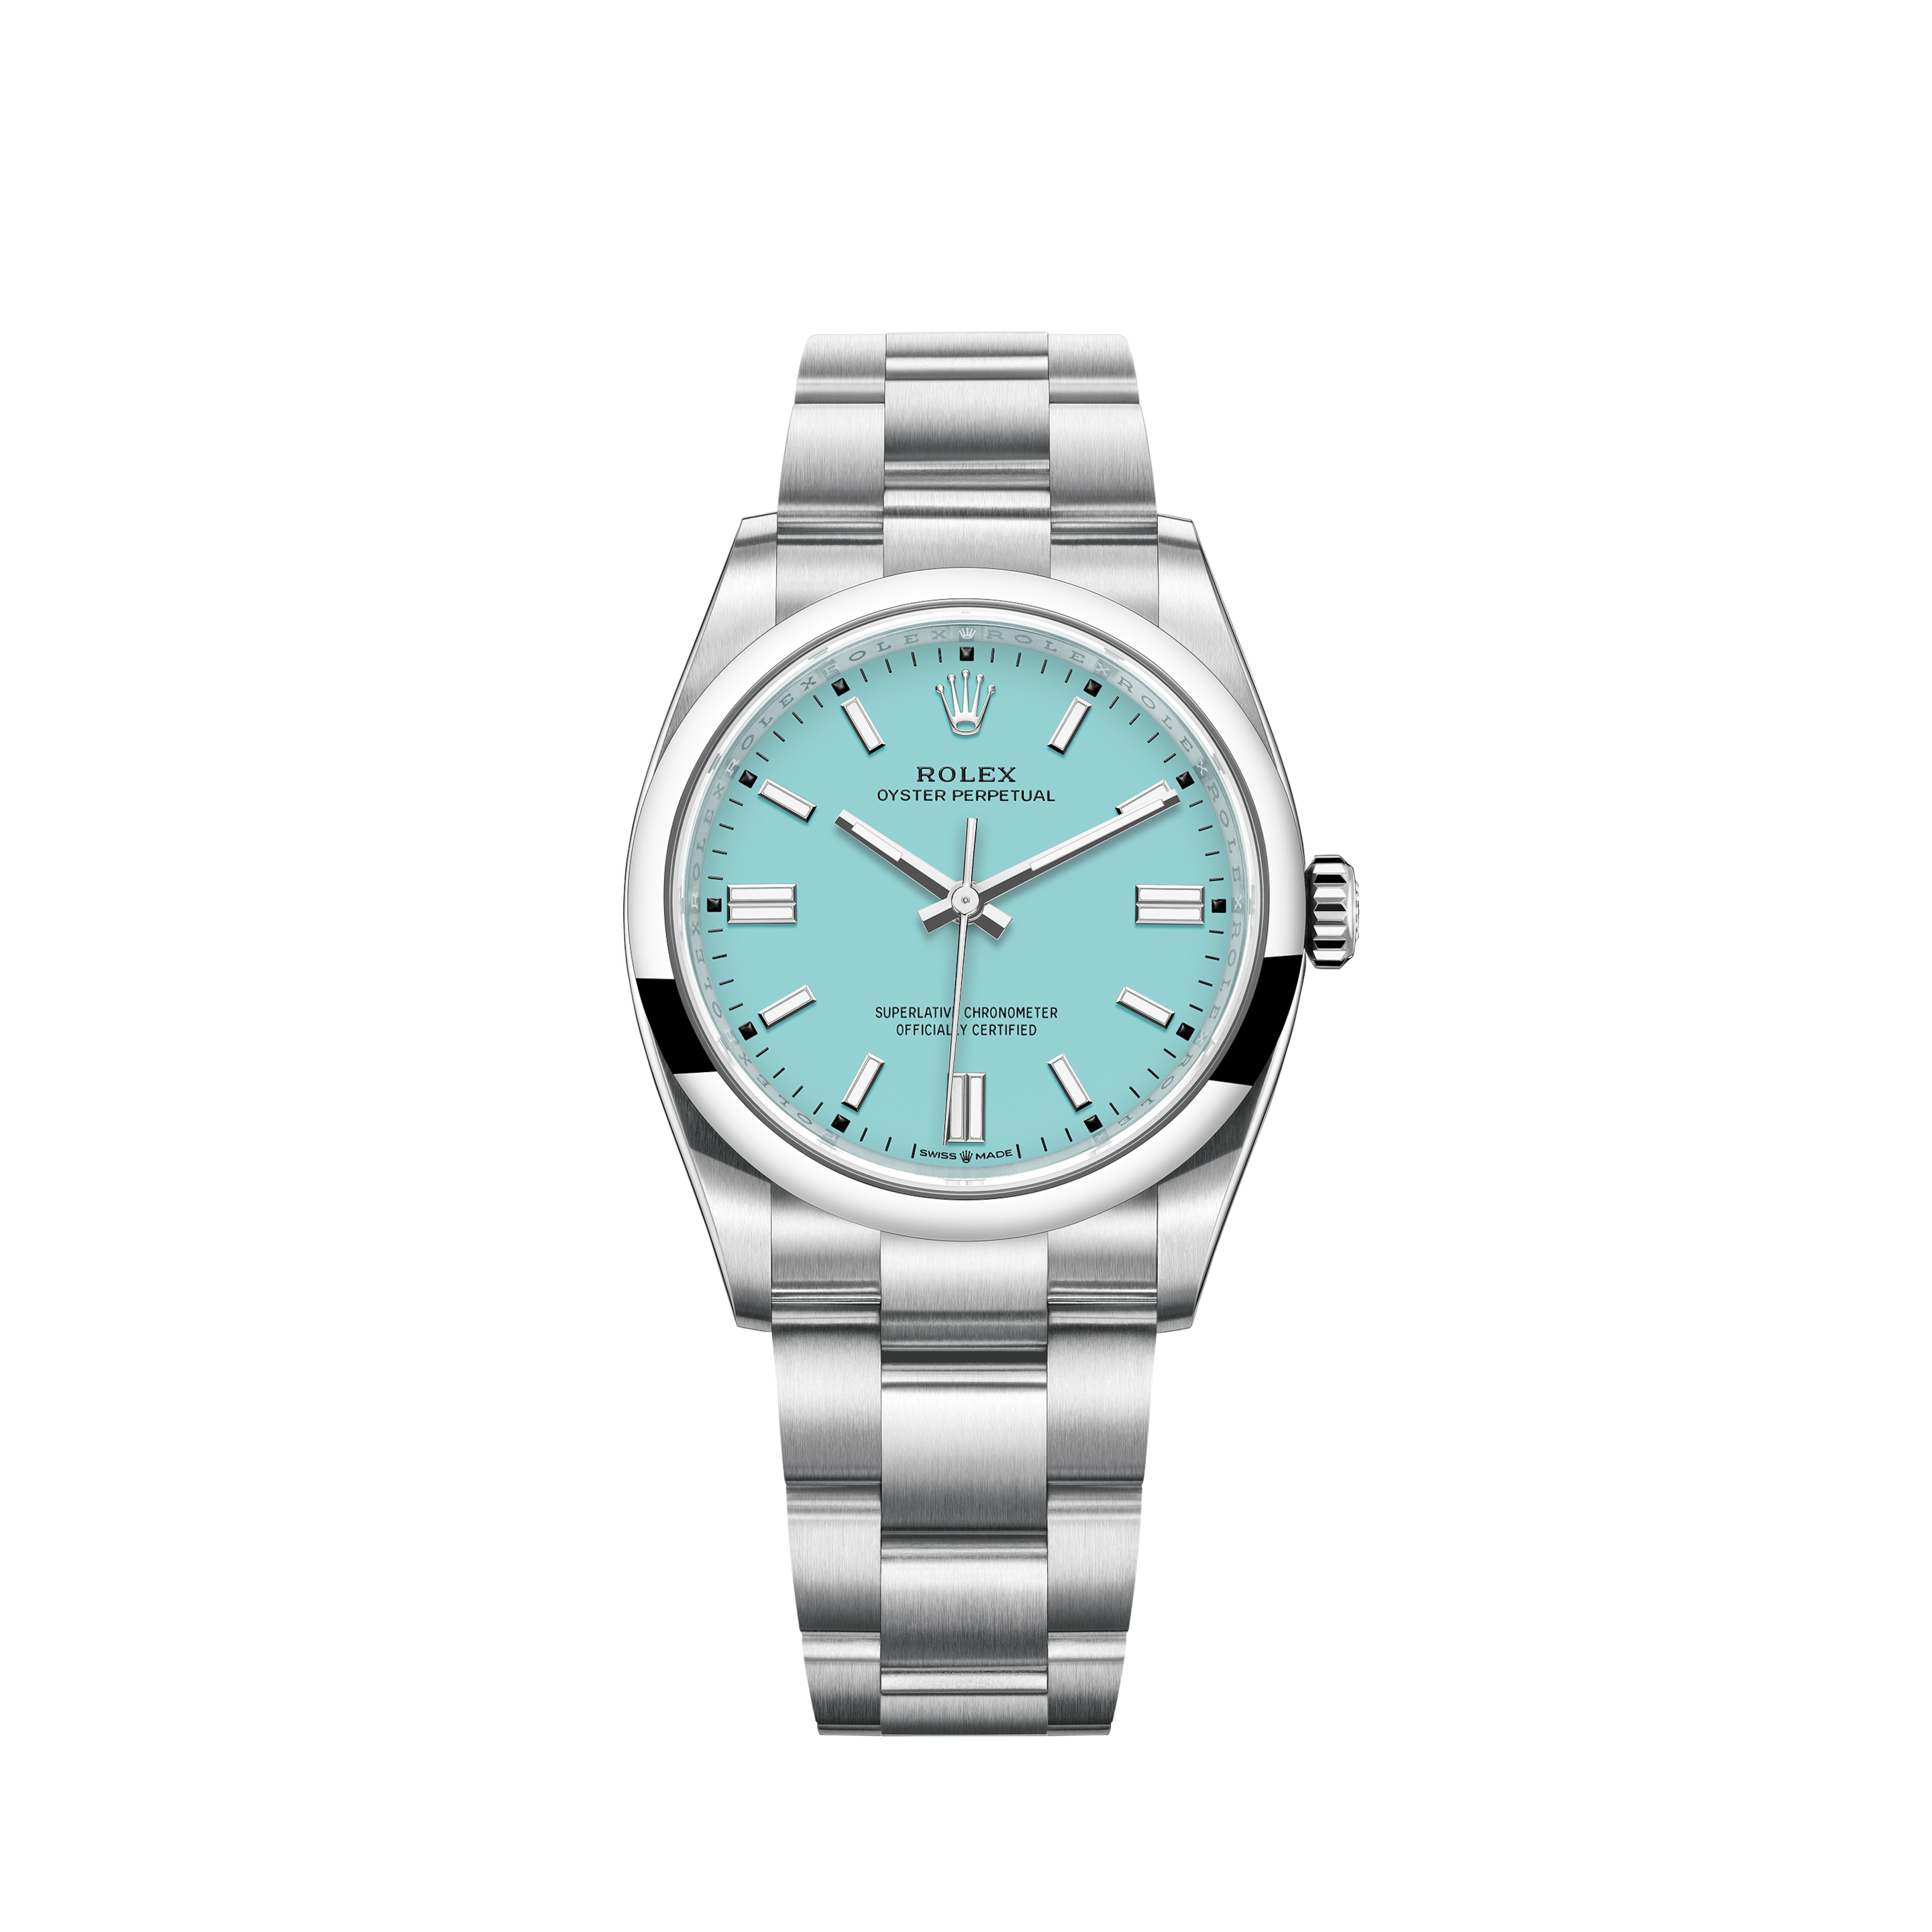 Rolex Datejust 36mm Champagne Discreet Jubilee Design Dial with Diamonds & Emeralds Swiss-Made WatchRolex Datejust 36mm Champagne Fluted Dial Diamond Bezel Oyster Bracelet Stainless Steel and Yell